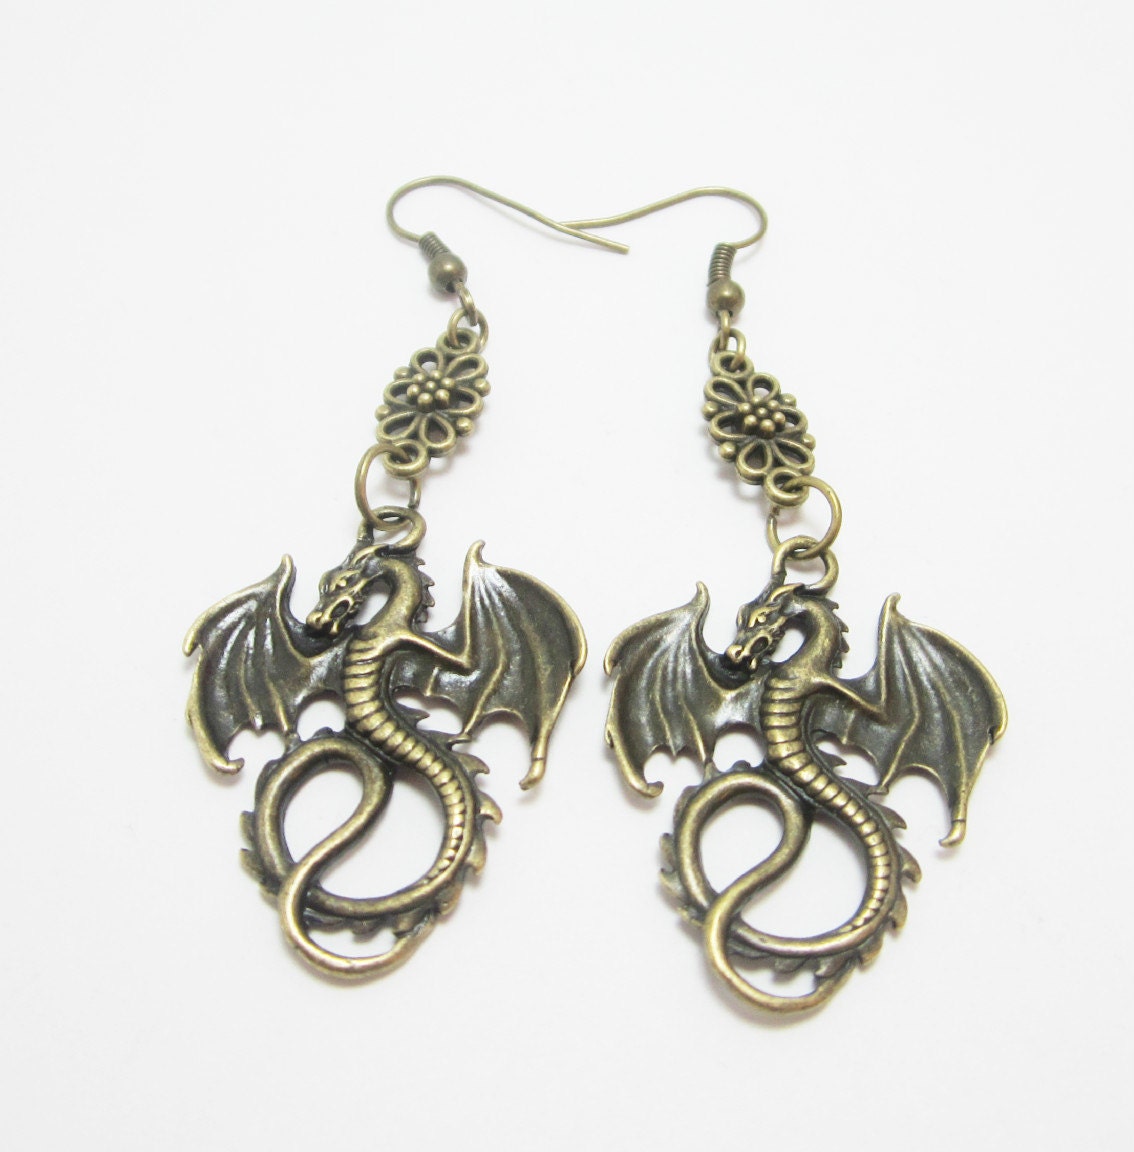 Fantasy Dragon Earrings Bronze Charms Filigree Connector Goth